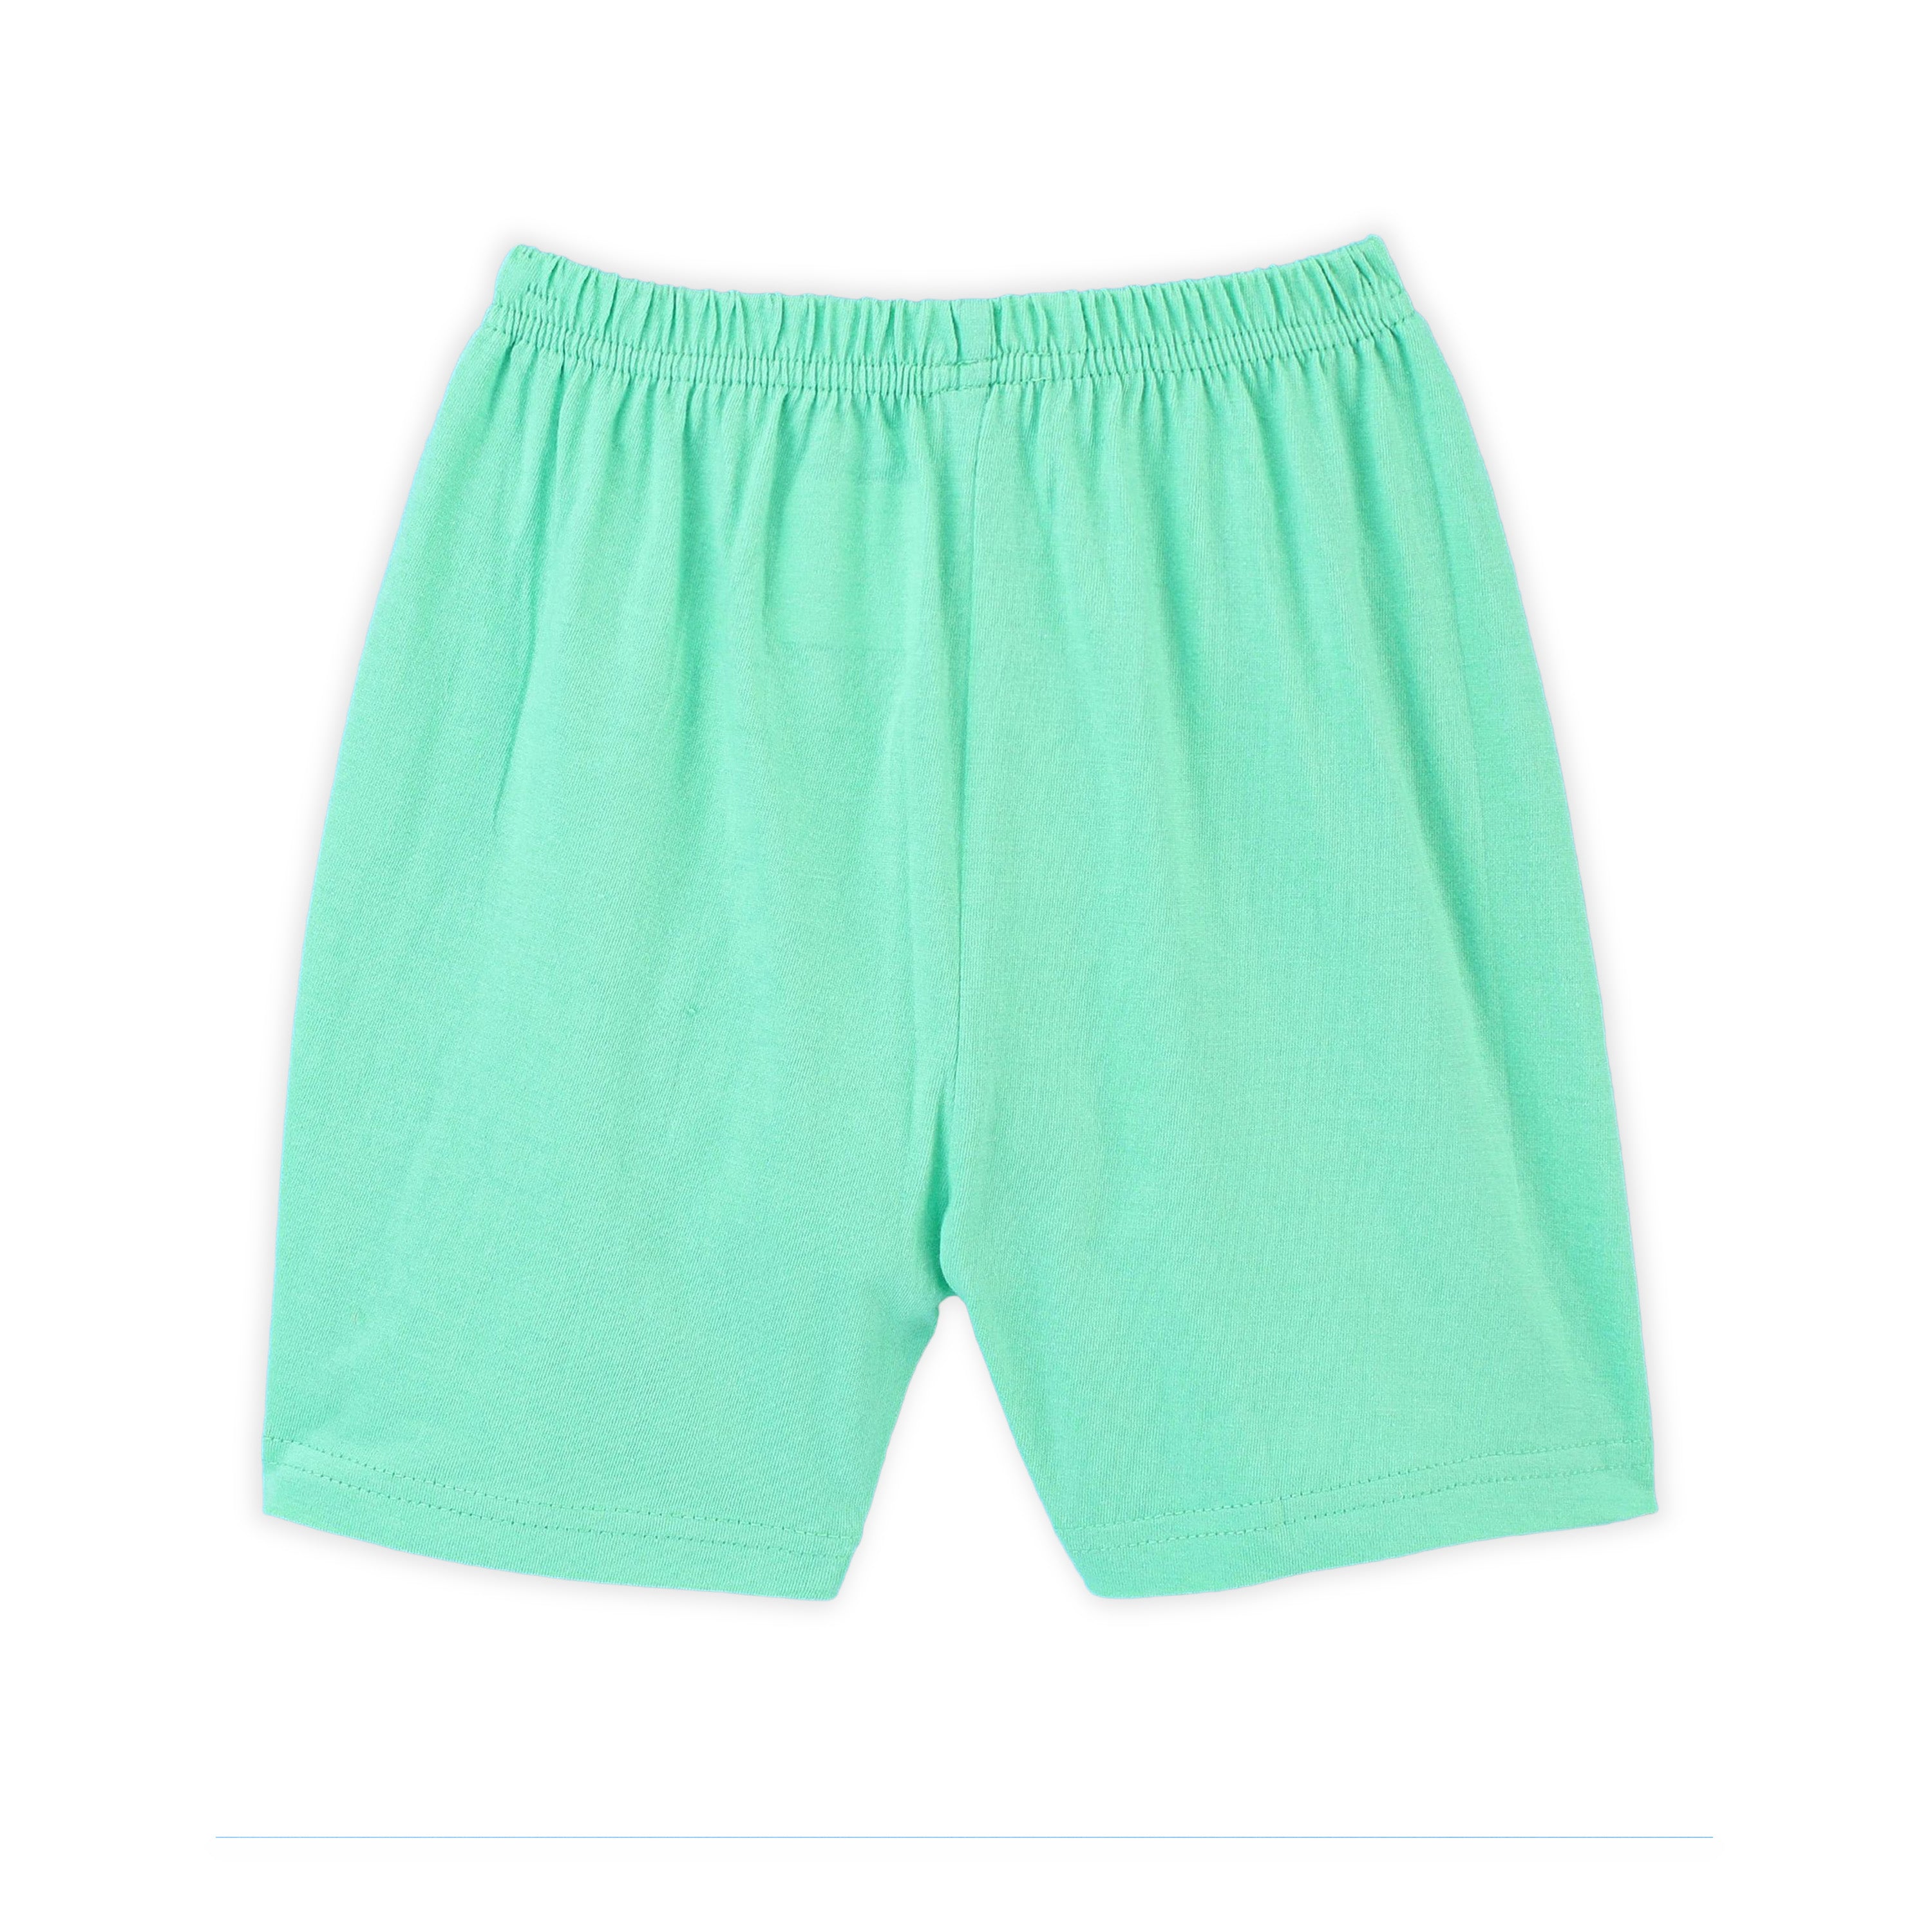 Kids Green Solid Cotton Shorts